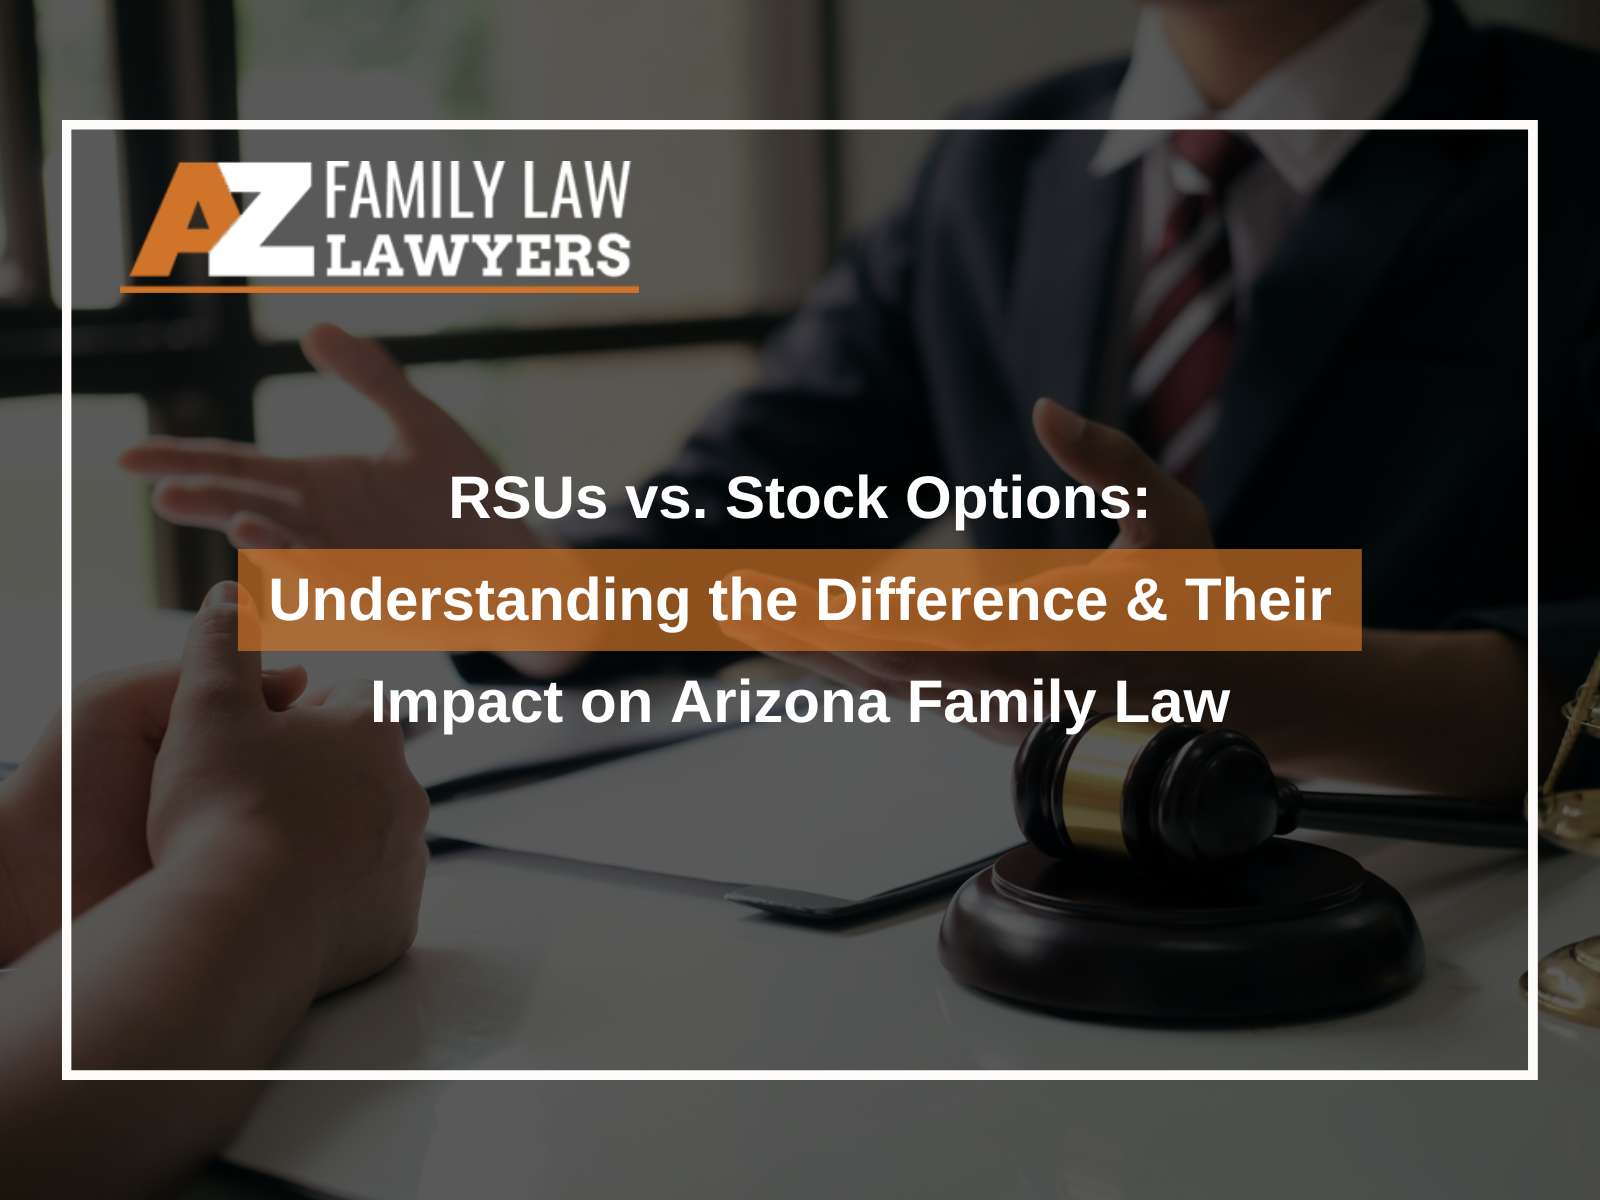 RSUs vs. Stock Options: Understanding the Difference & Their Impact on Arizona Family Law